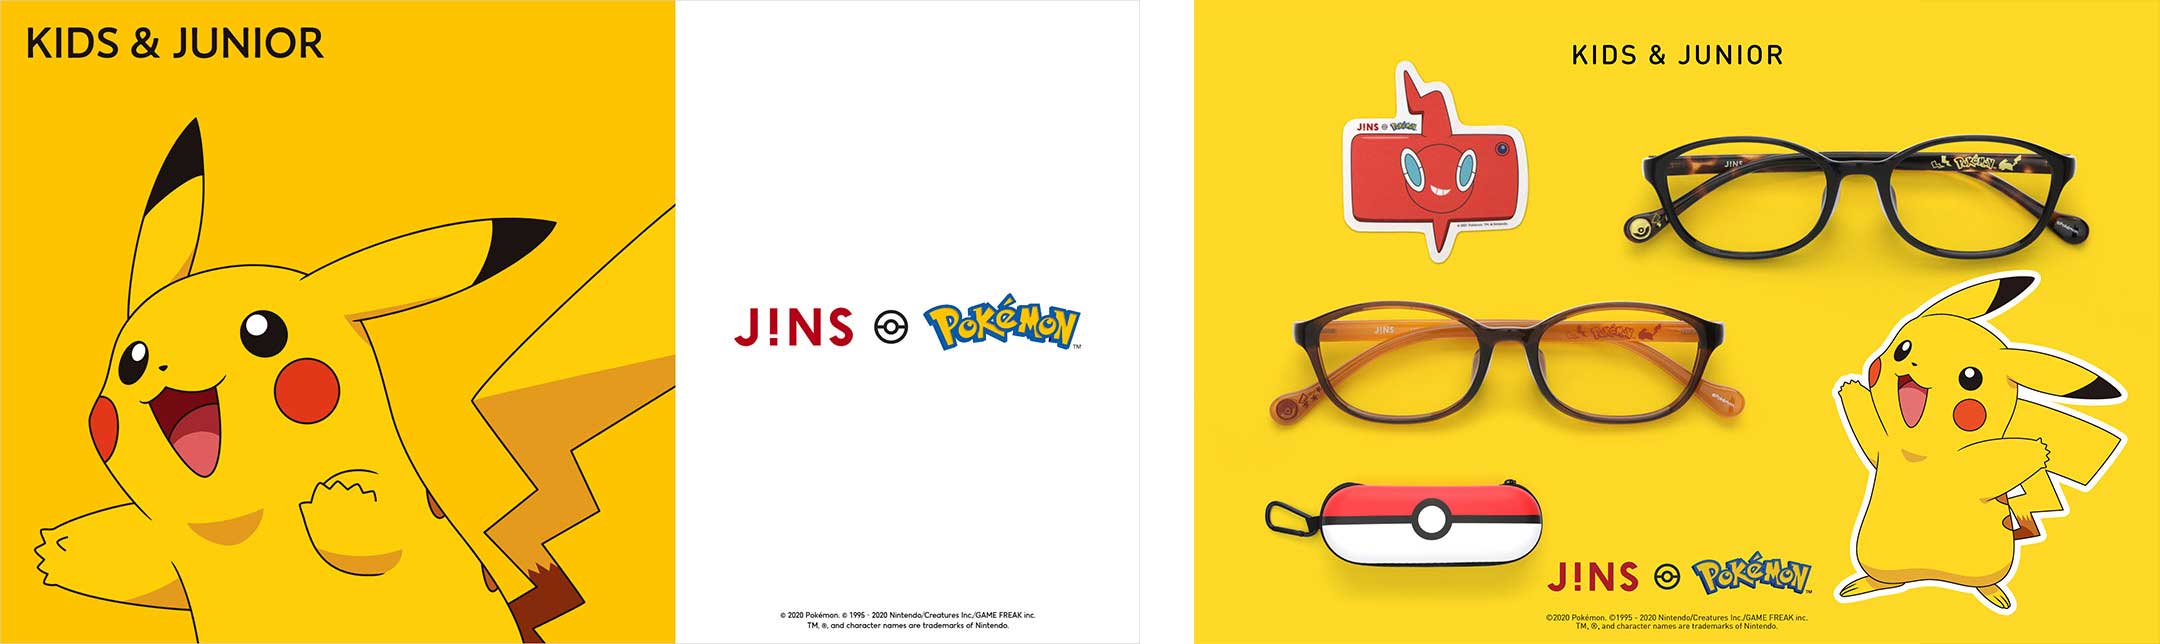 Frames inspired by the world of Pokémon